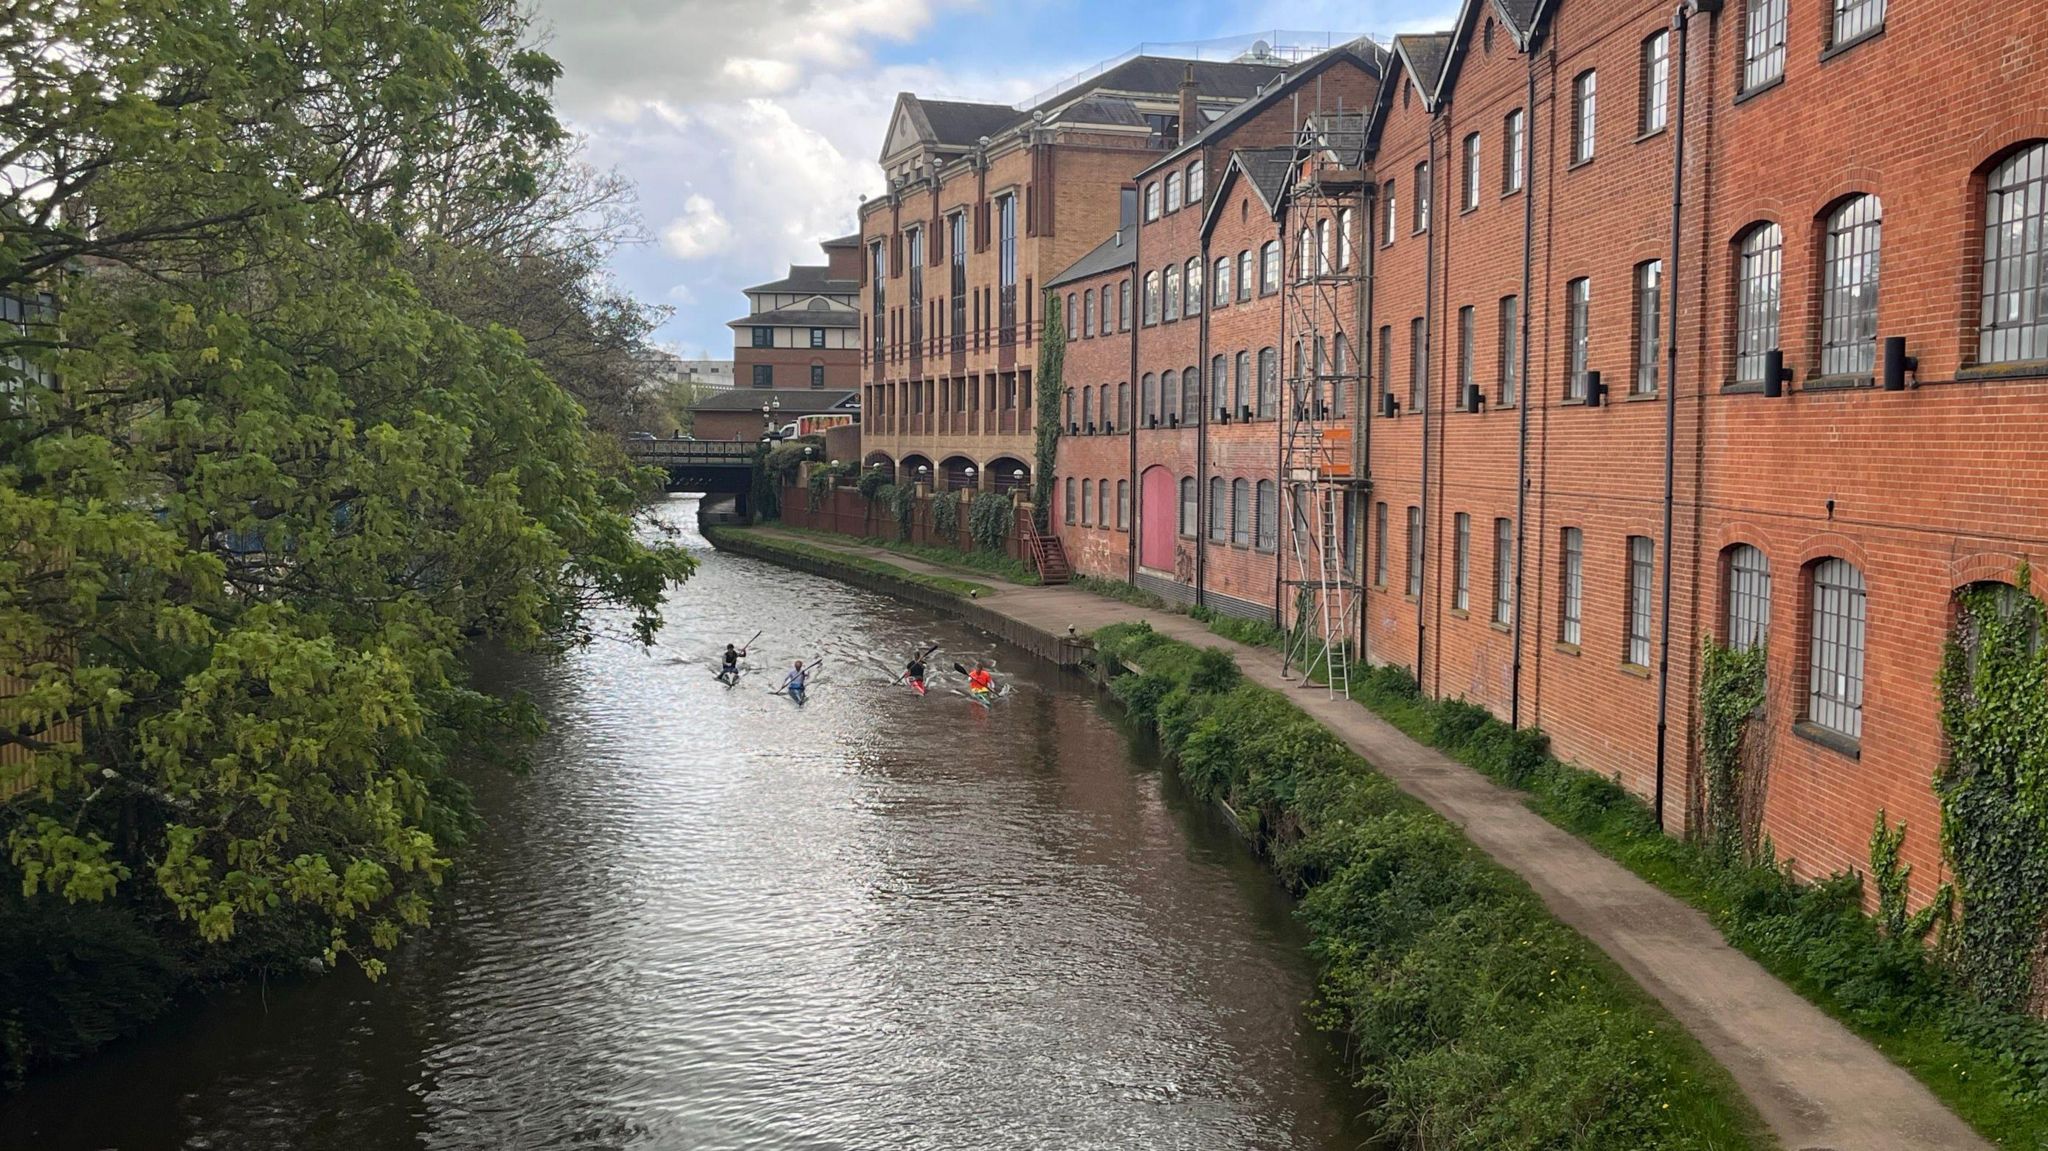 Kayakers on the river Wey in Guildford